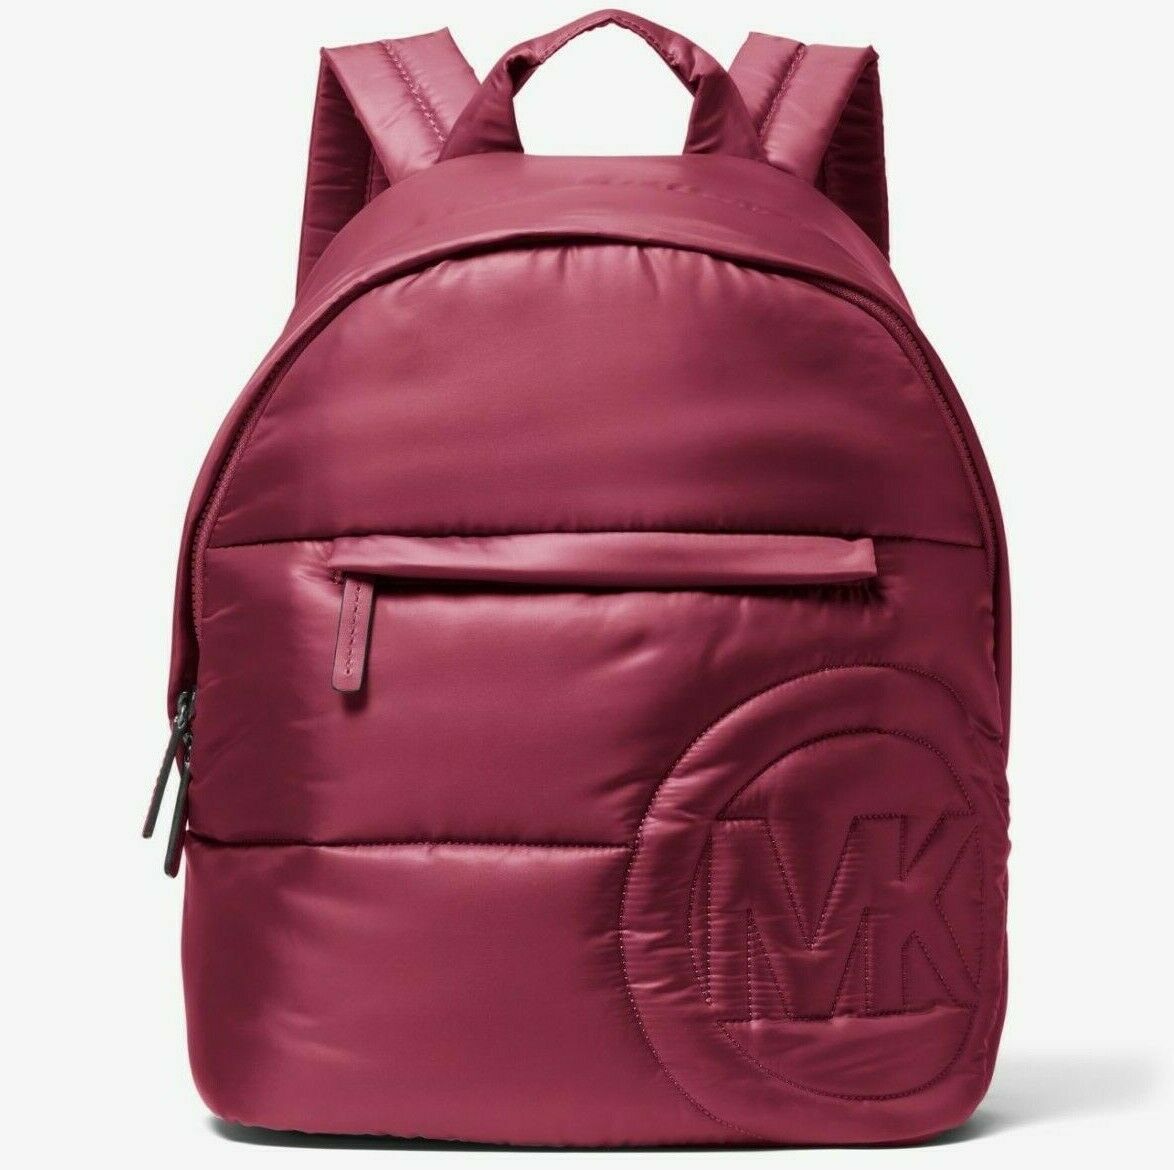 Primary image for Michael Kors Rae Medium Quilted Nylon Burgundy Backpack 35F1U5RB2C NWT $368 FS Y